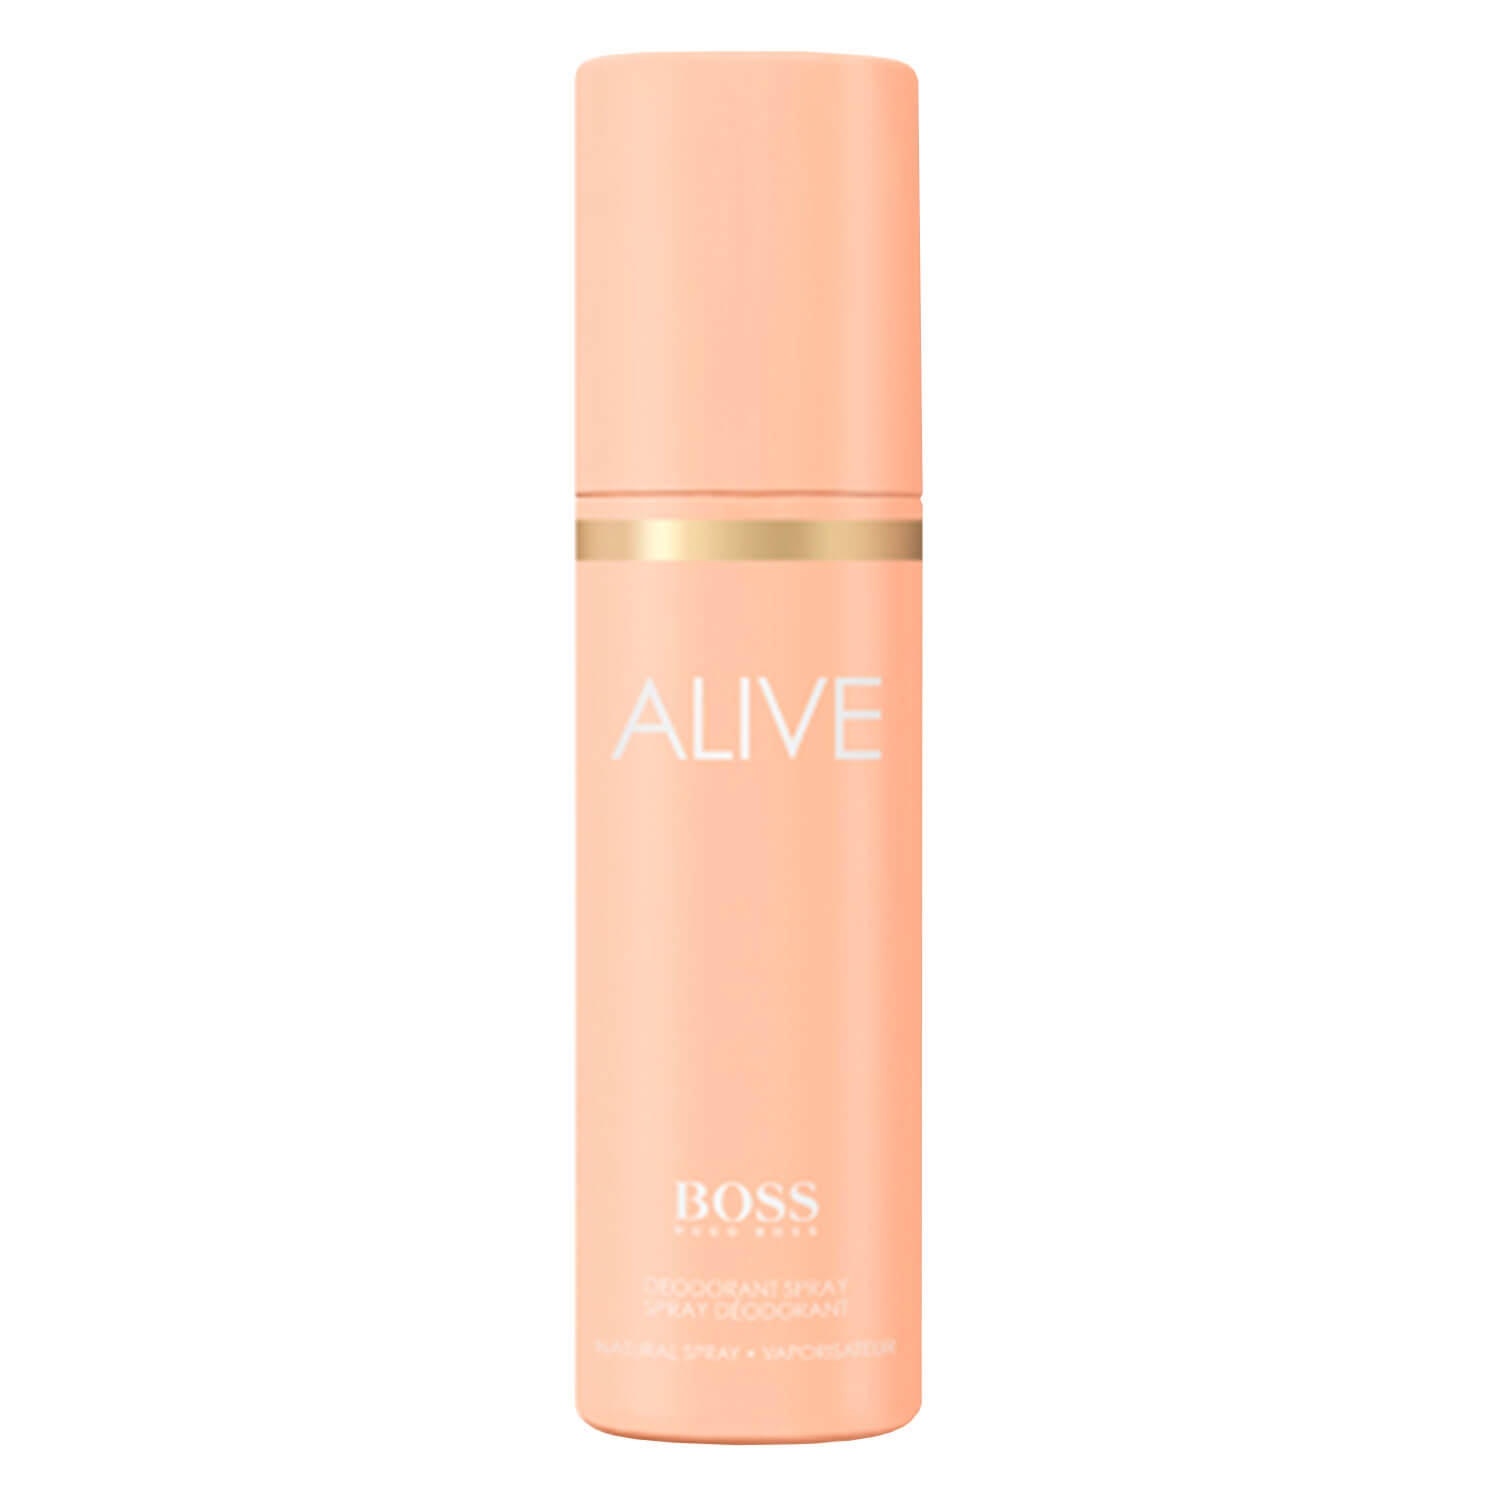 Product image from Boss Alive - Deodorant Spray